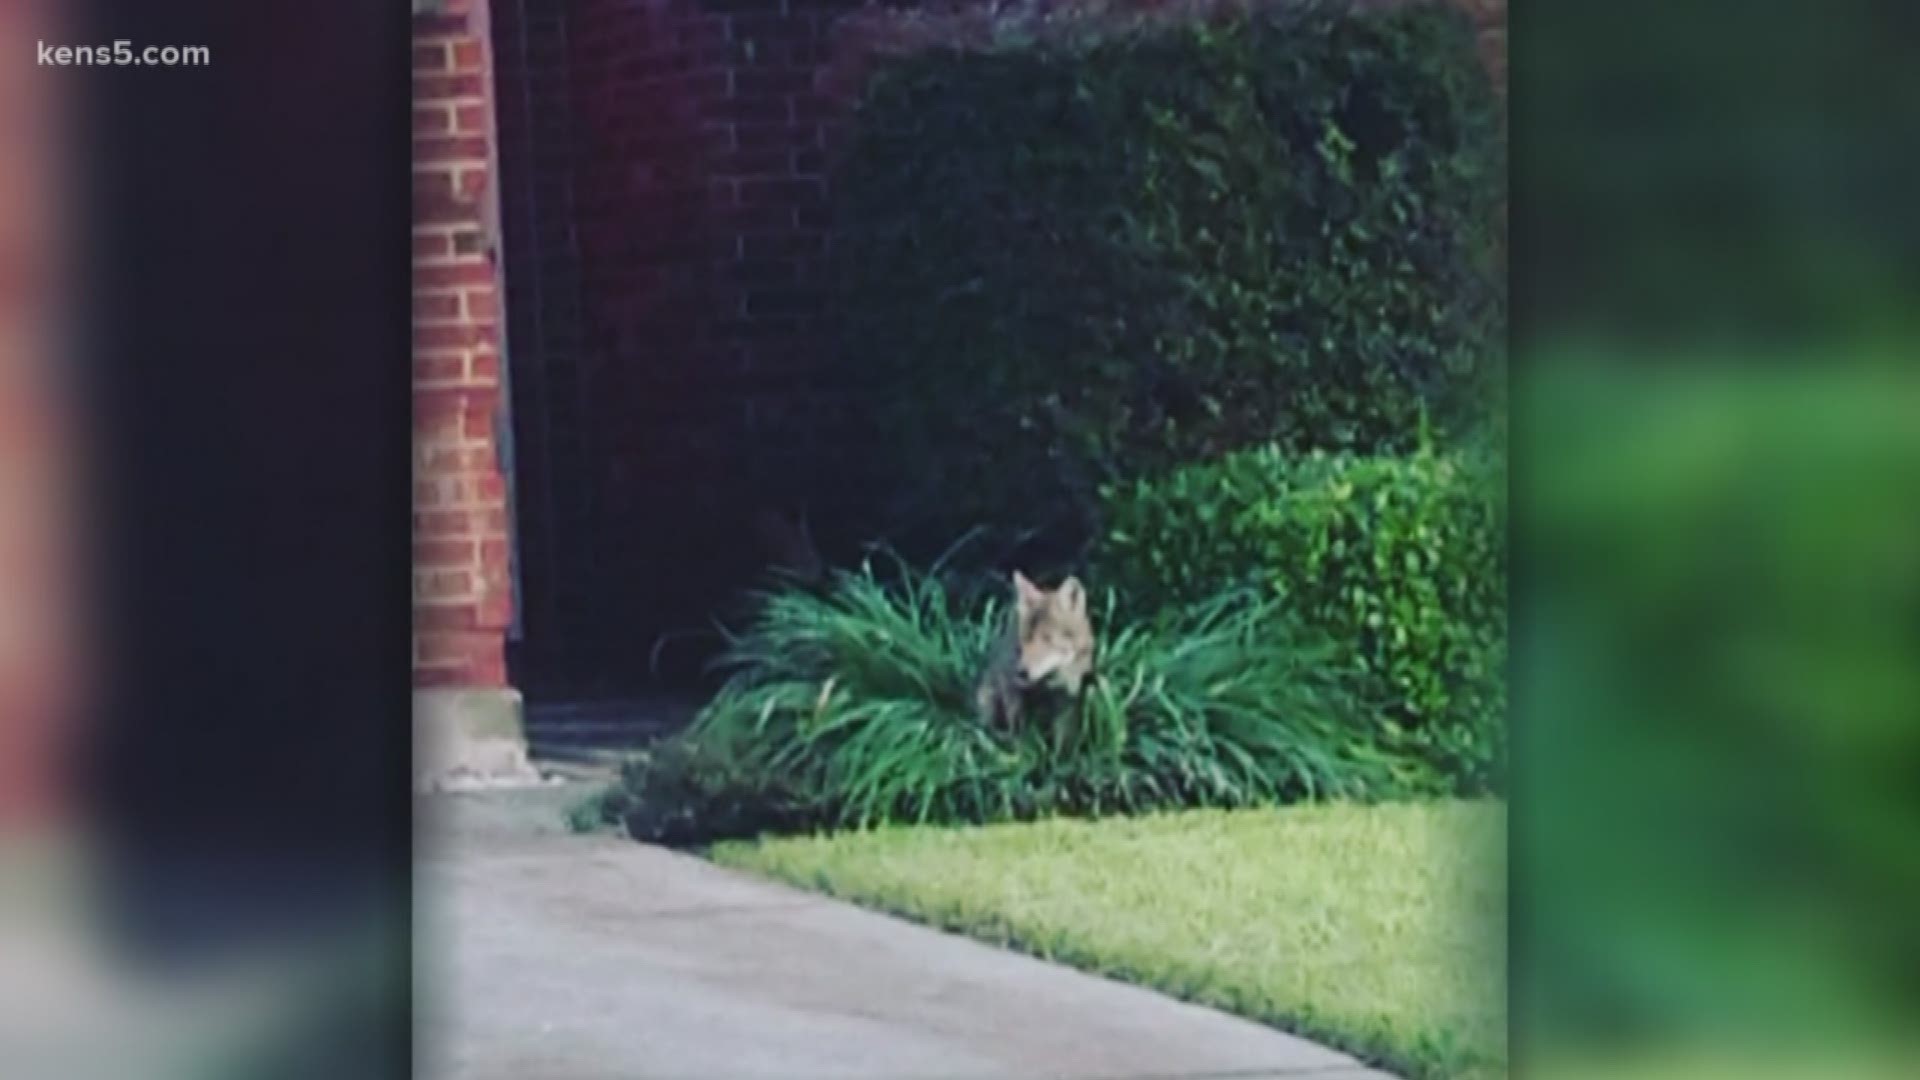 Some Alamo City residents haven't just spotted the wild animals cutting through their neighborhoods; they've also been caught feasting on pets.